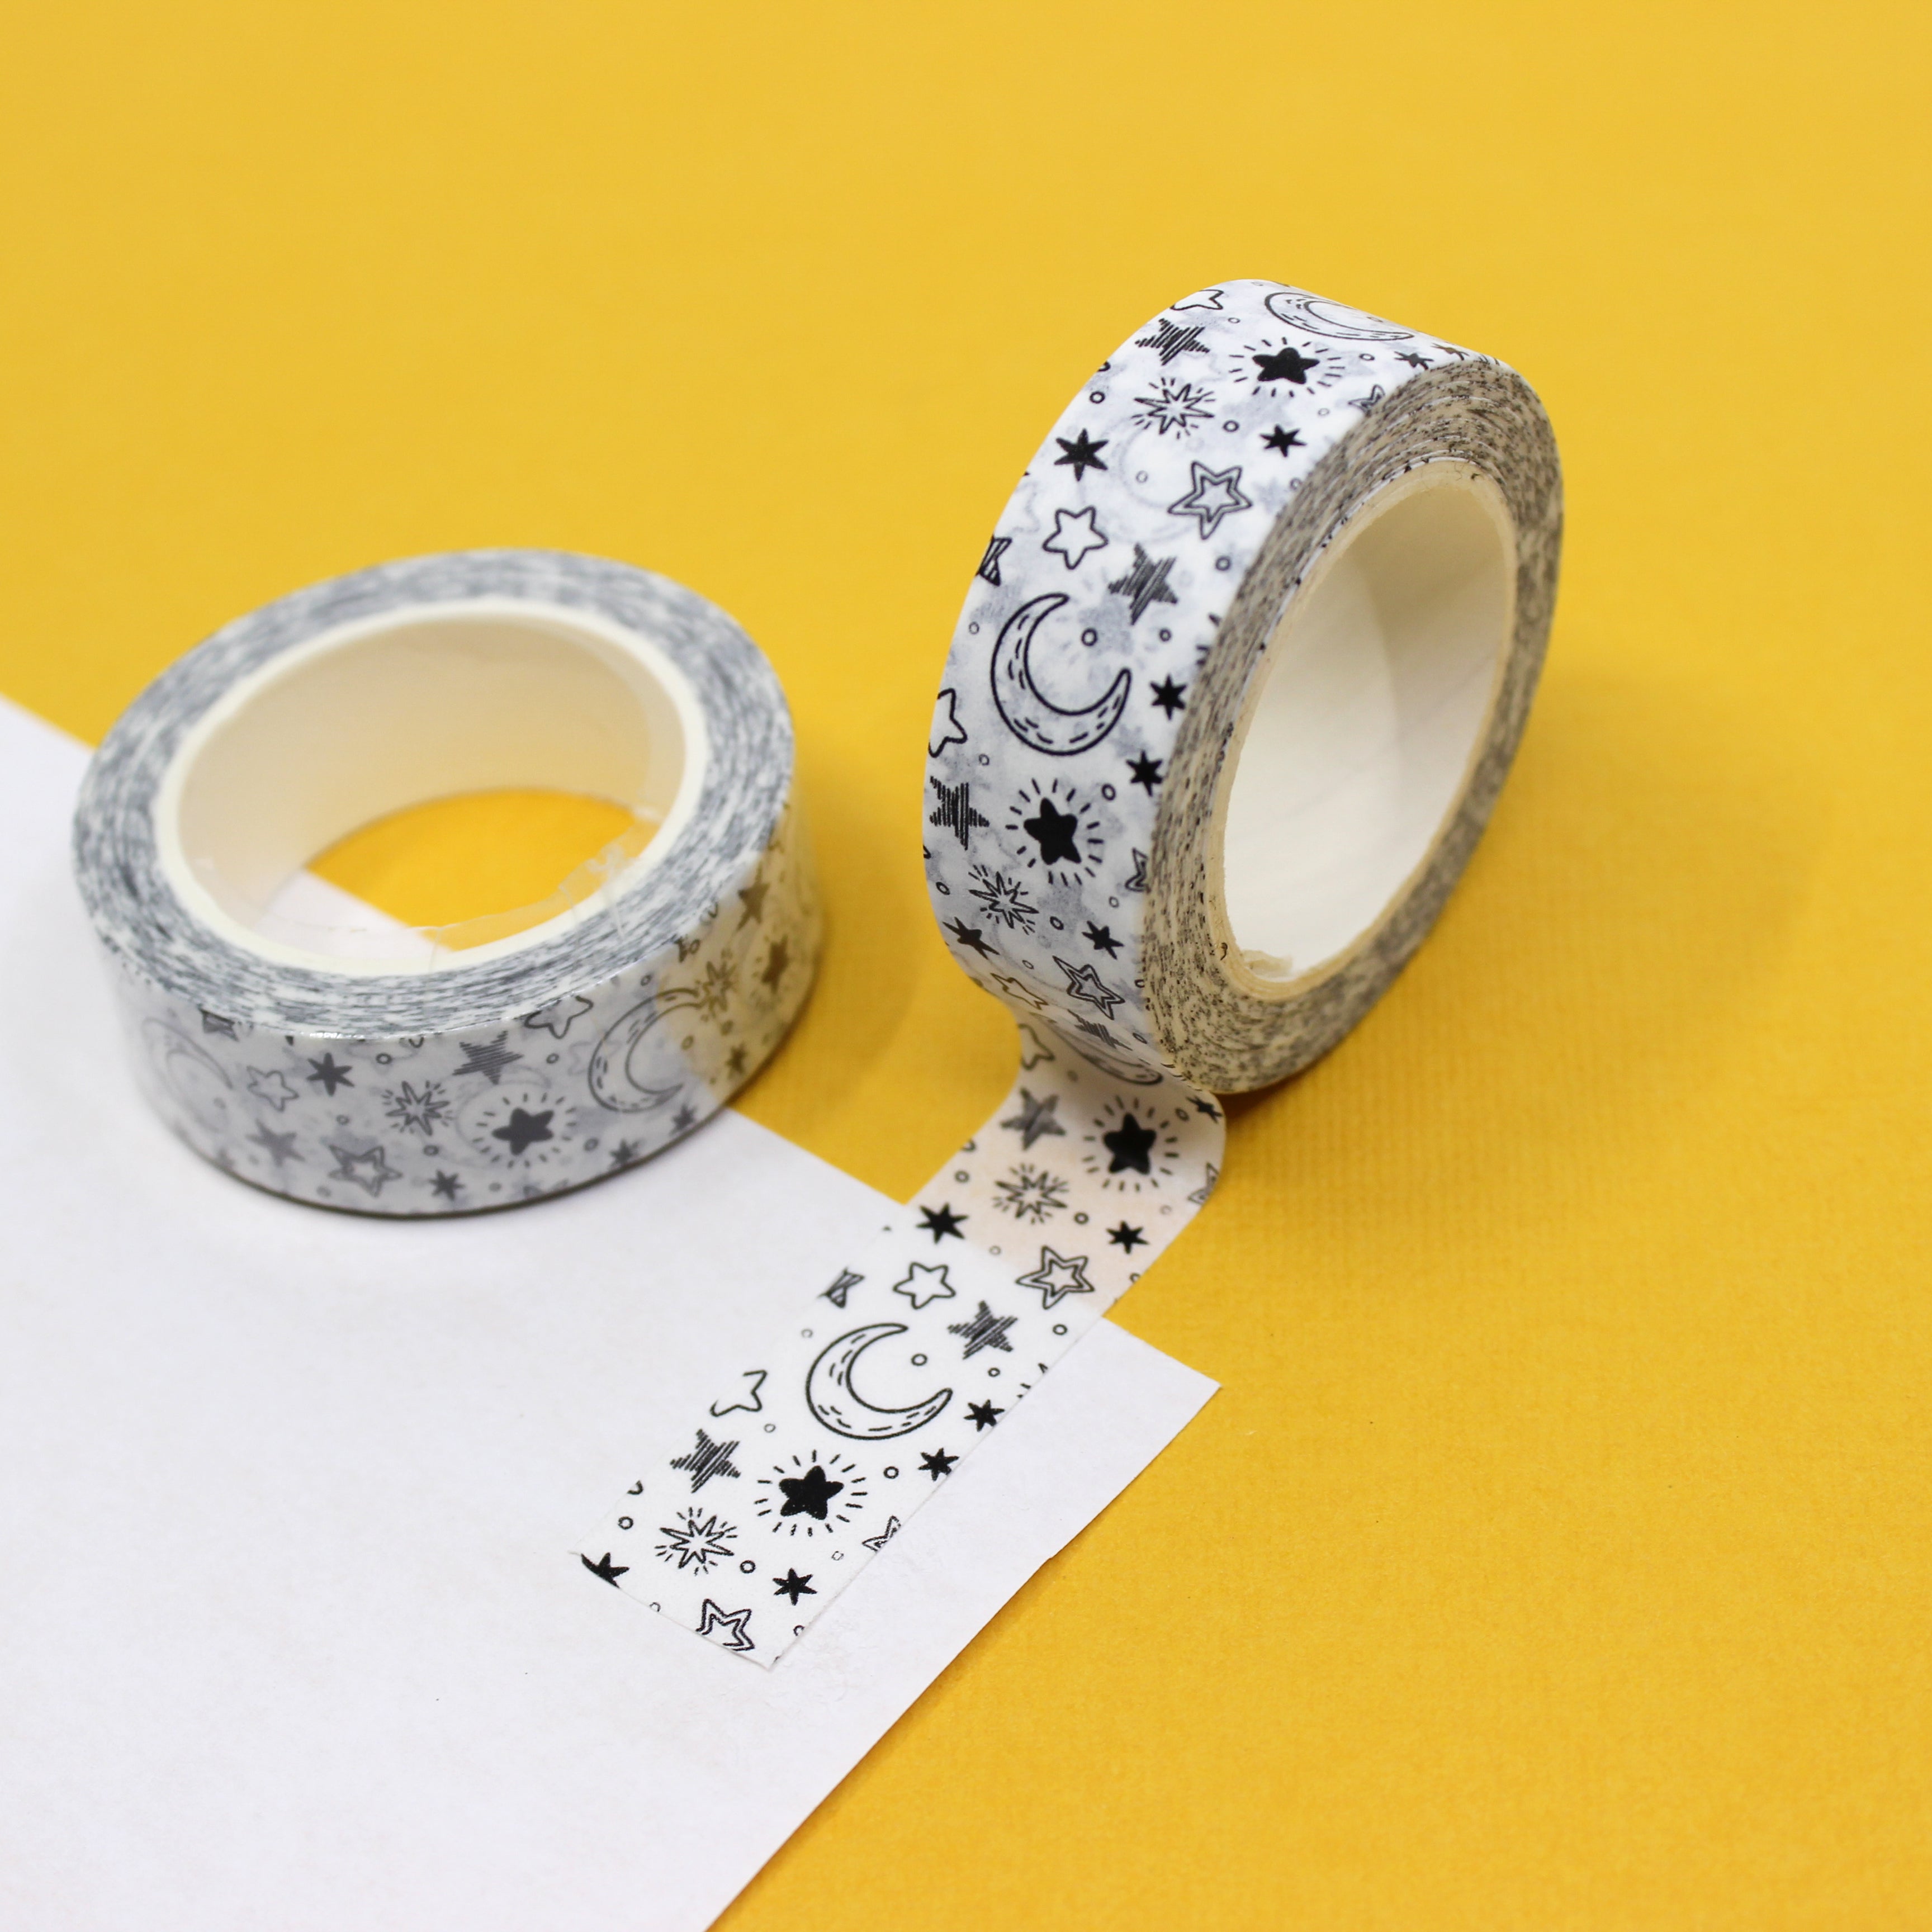 This is a black and white interstellar themed washi tape from BBB Supplies Craft Shop